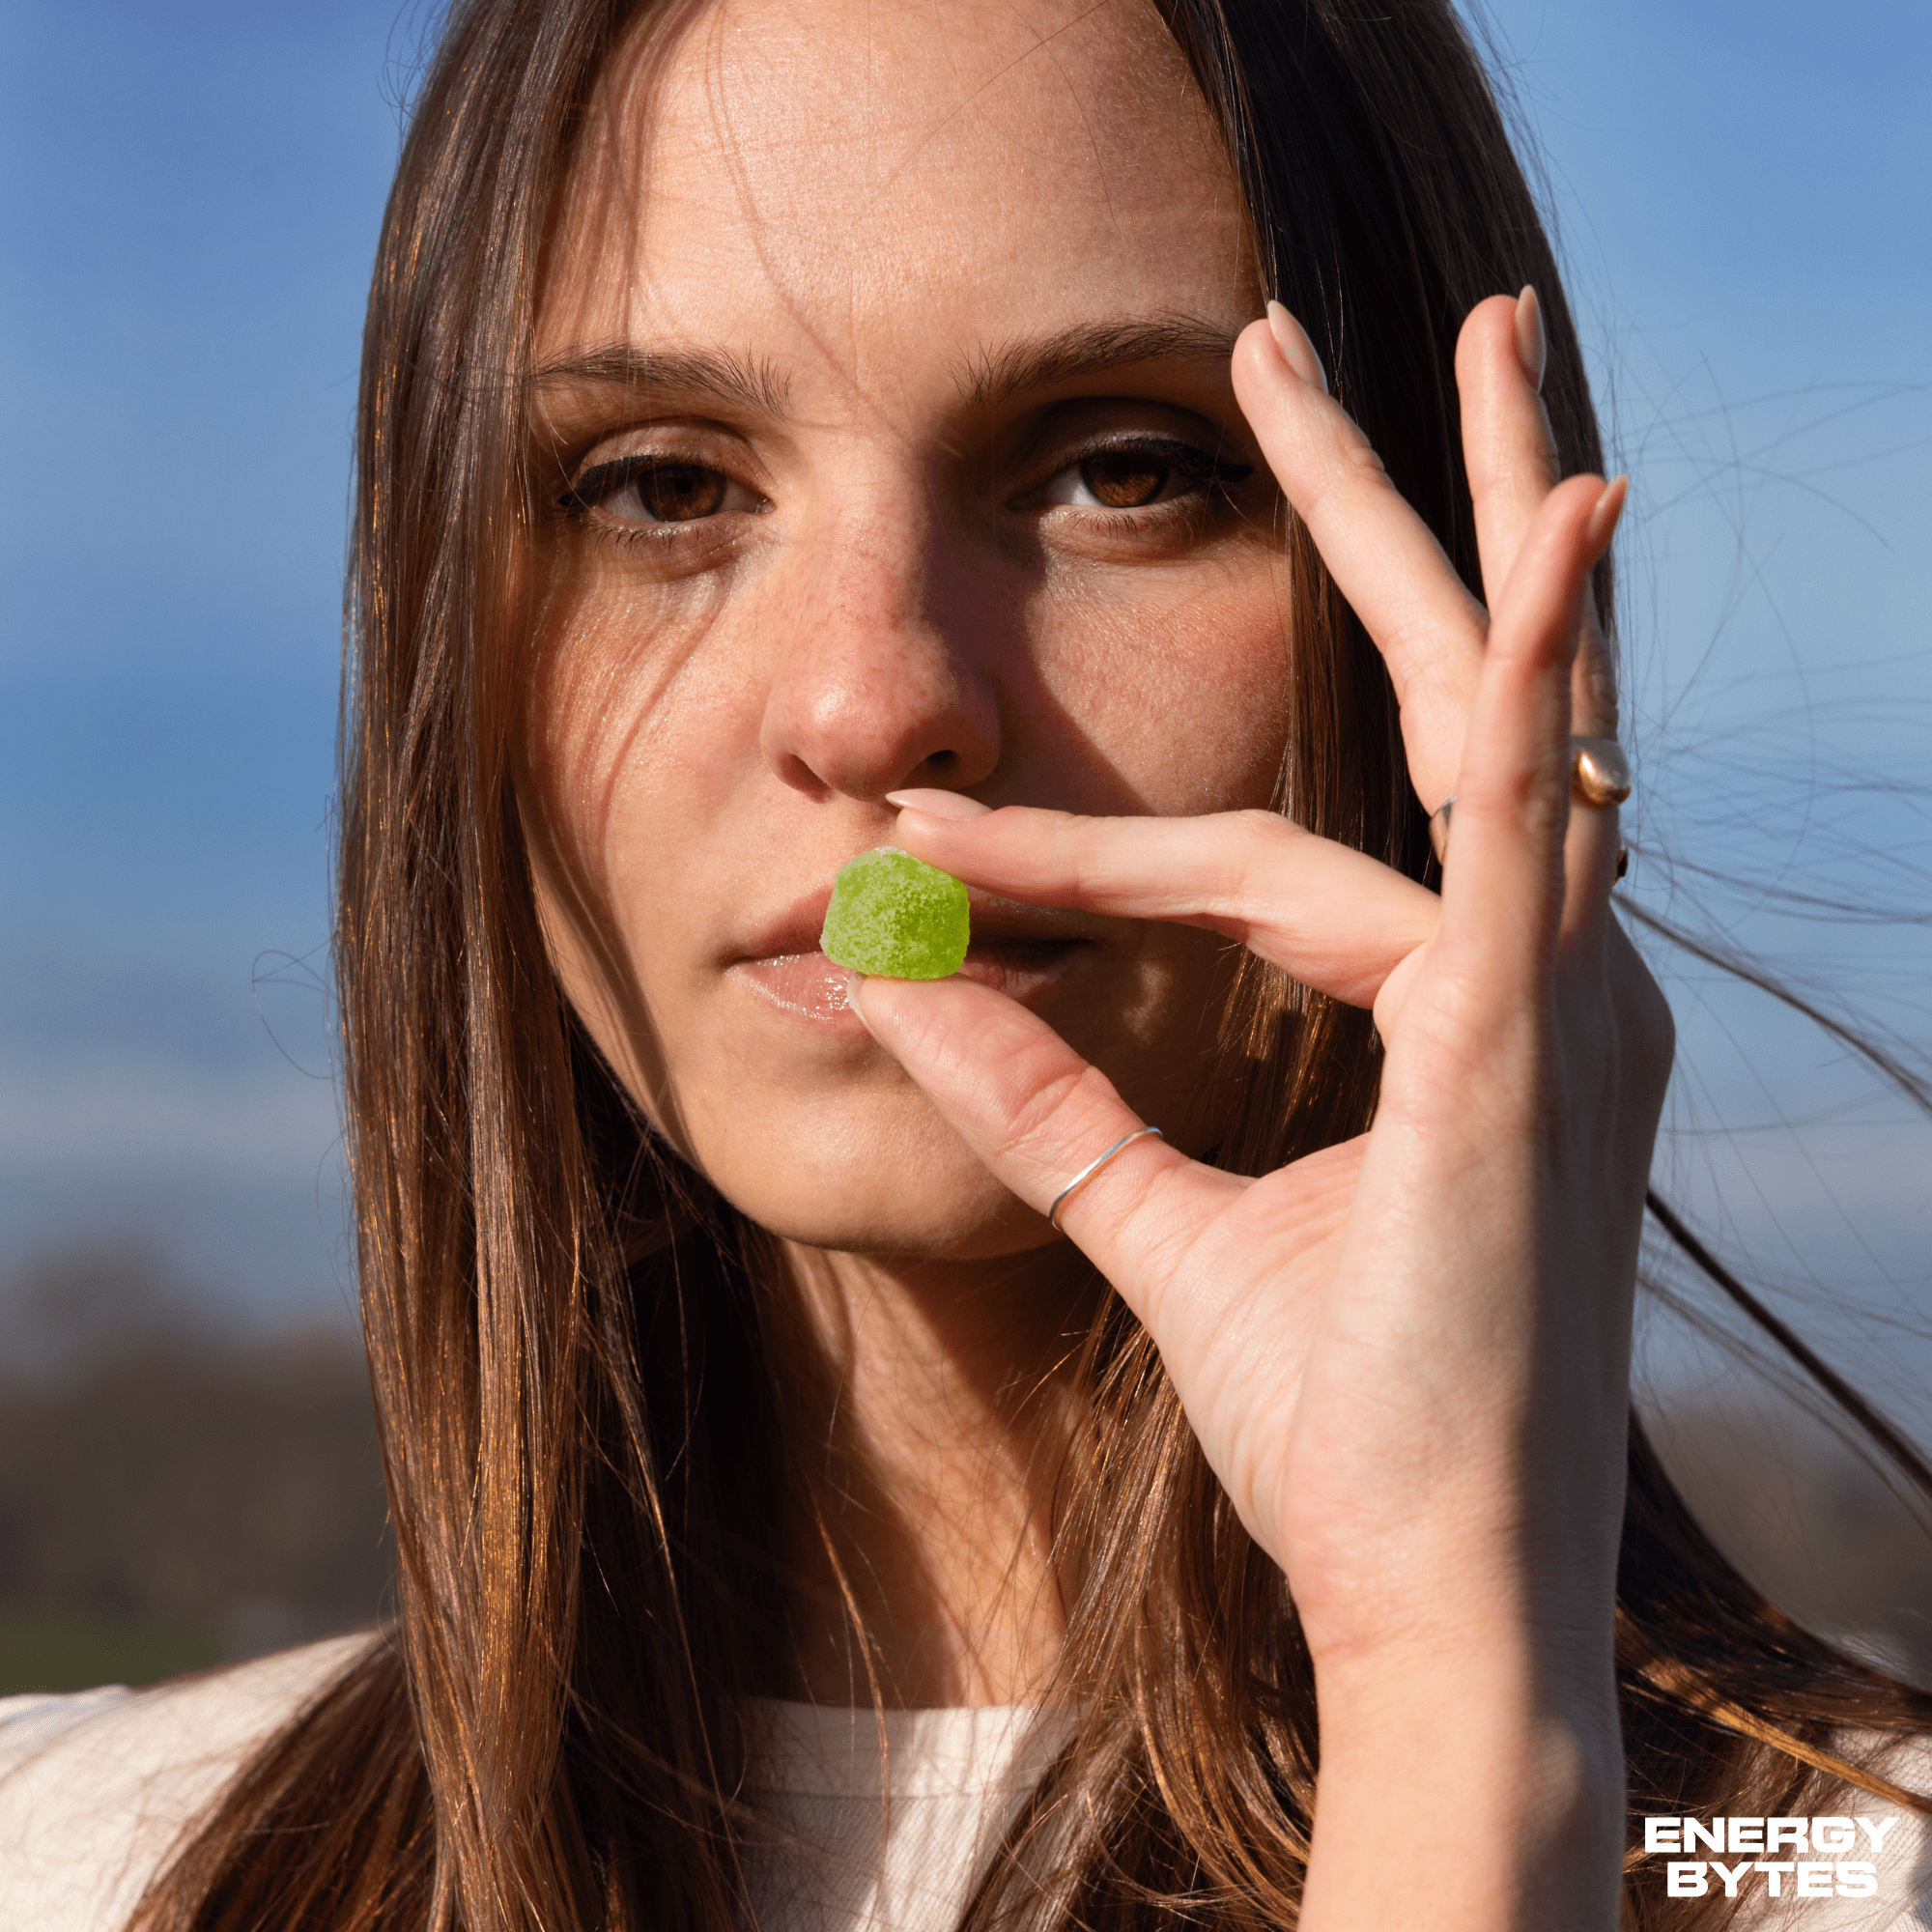 Woman holding up a single Atomic Apple Energy Bytes gummy before a clear sky backdrop, illustrating the zesty, energising snack option ideal for active lifestyles.